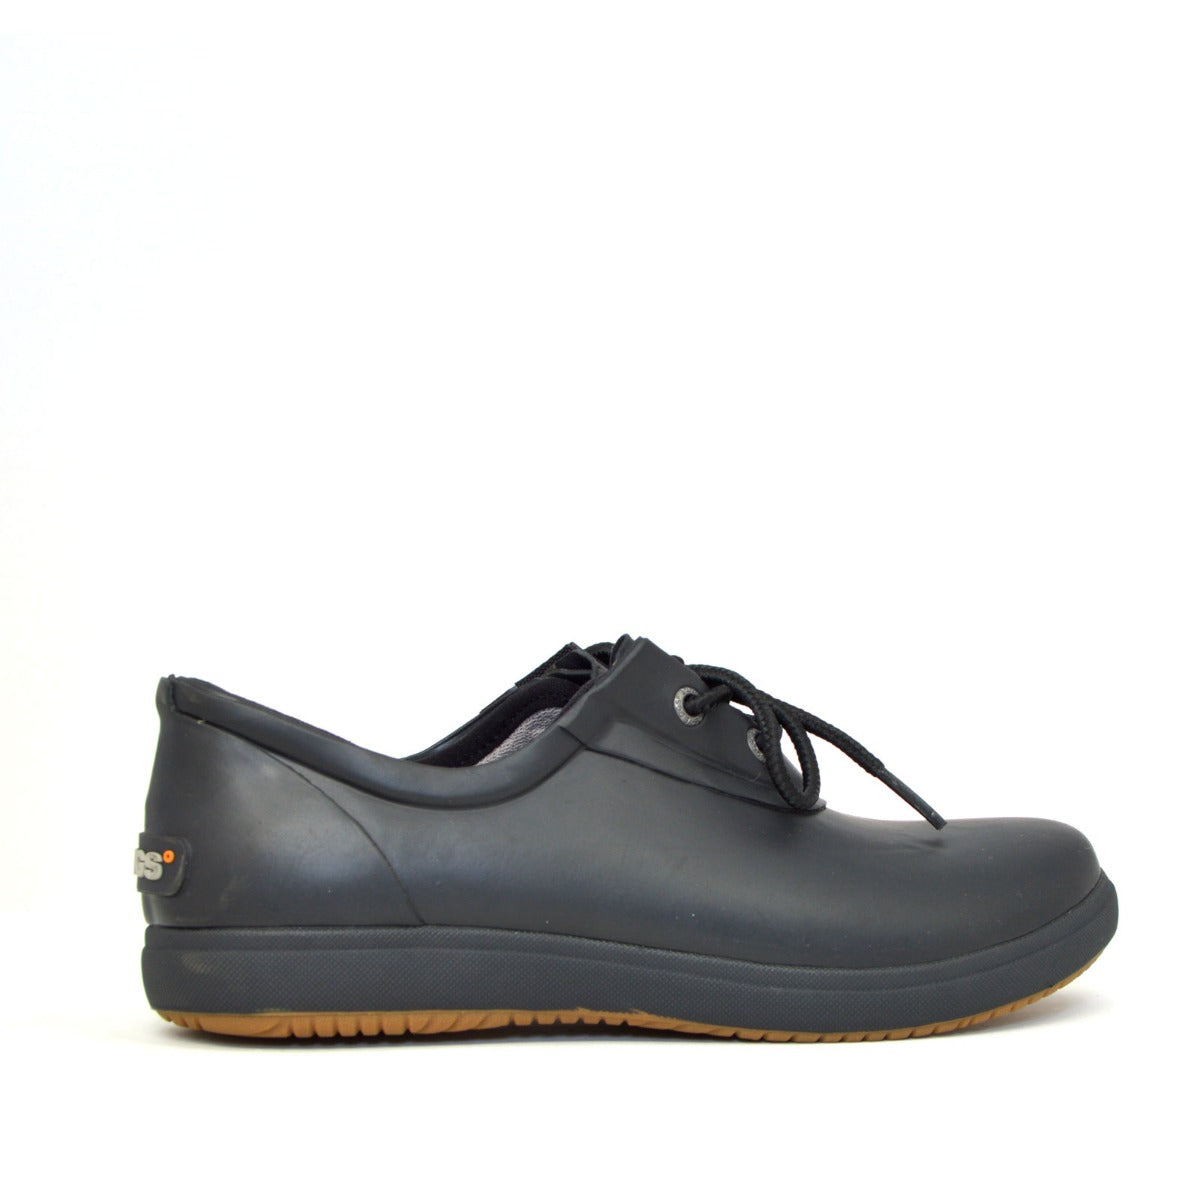 Bogs Quinn Rubbers Shoes All Black